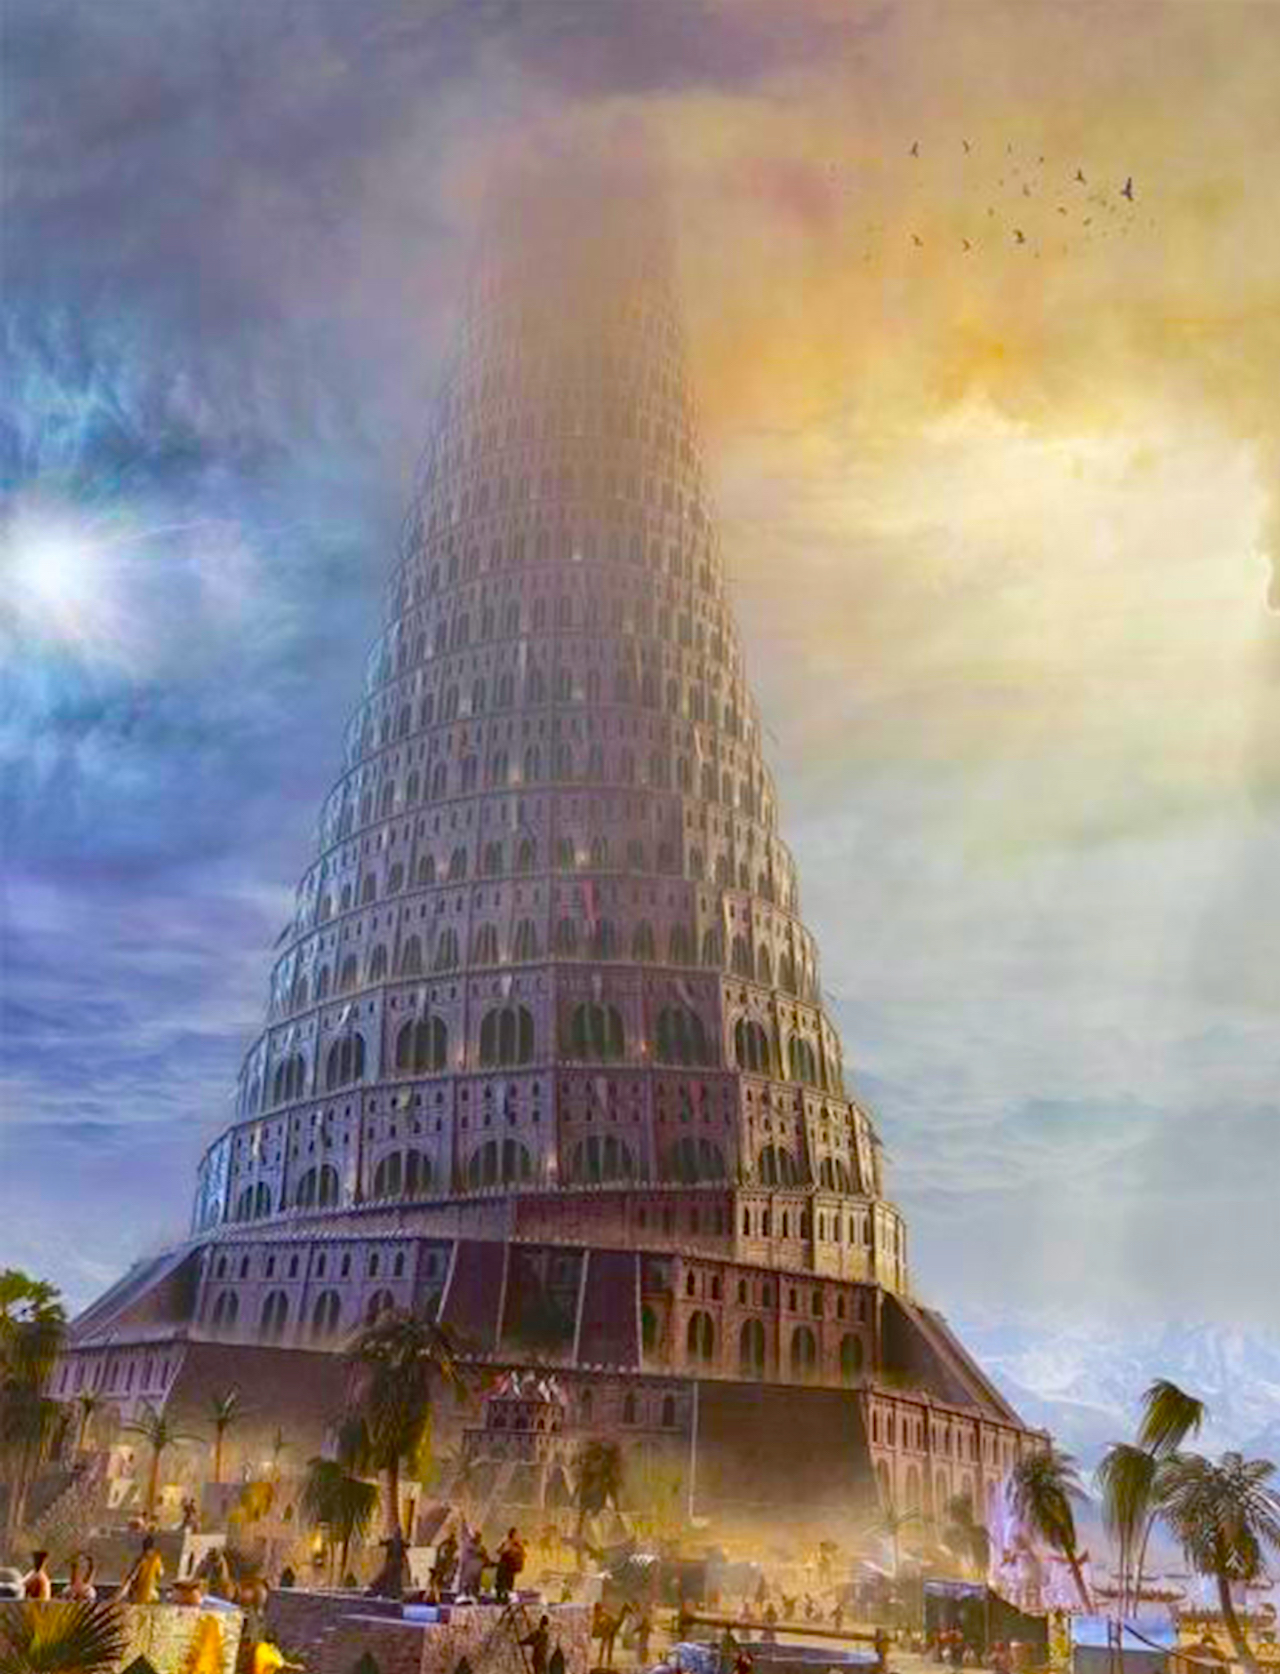 The City of Babel: Yesterday and Today